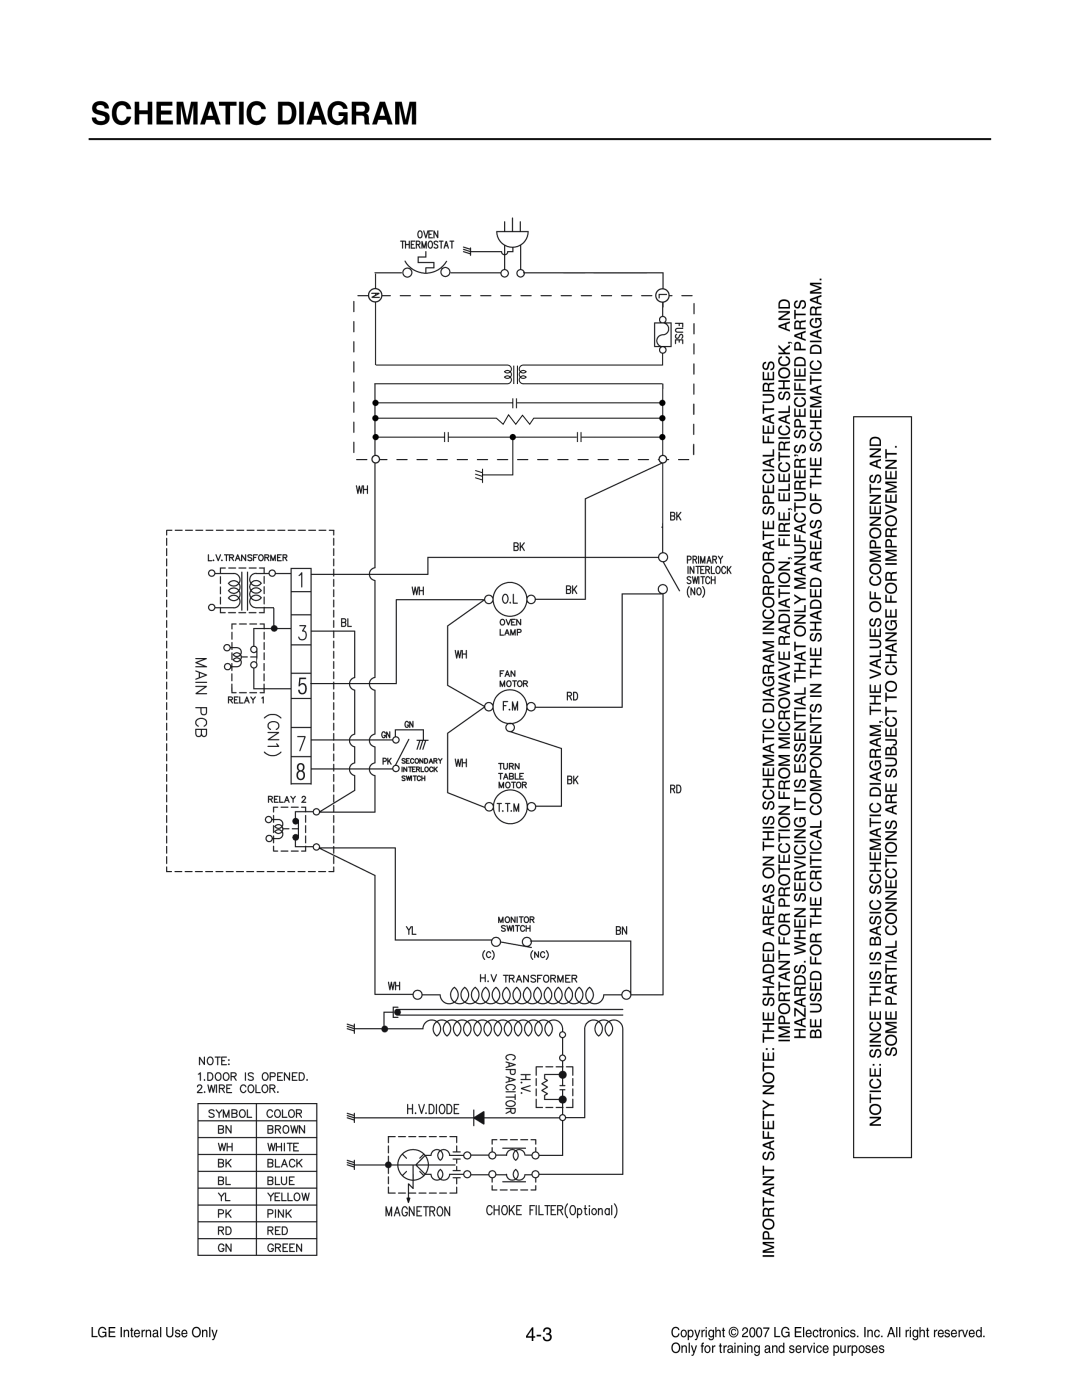 LG Electronics MS3447GRS service manual Schematic Diagram, LGE Internal Use Only, Only for training and service purposes 